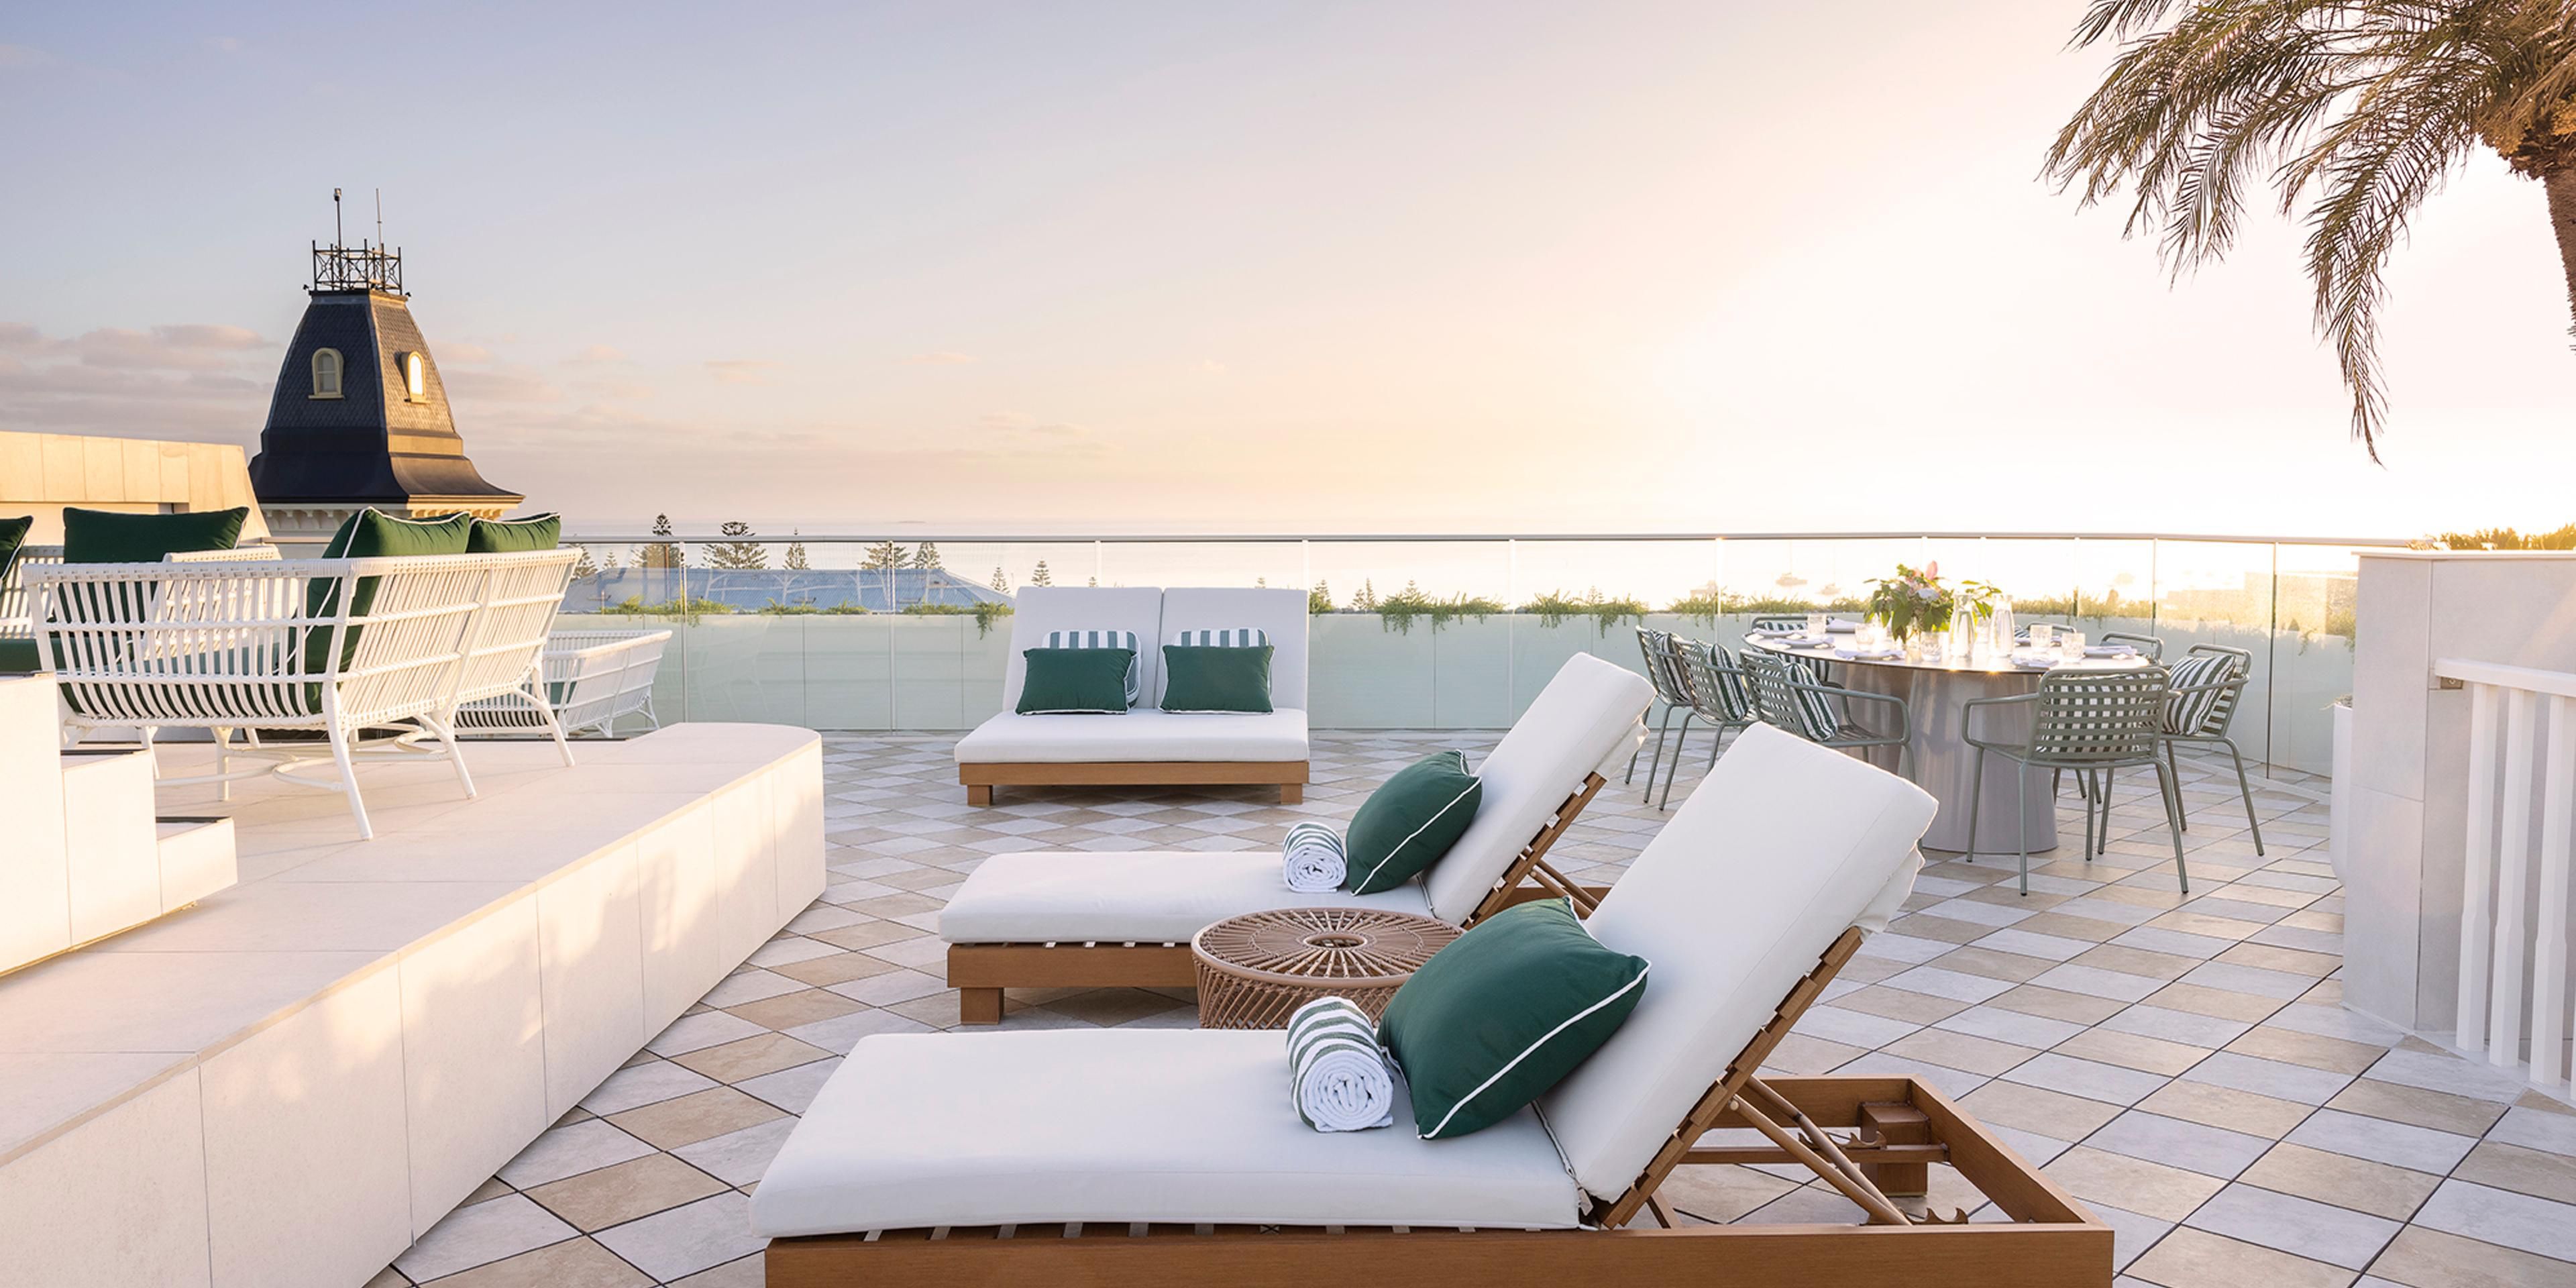 Immerse yourself in unparalleled coastal glamour. Spanning two storeys and a private rooftop terrace, our Penthouse Suites offer captivating bay views, a private plunge pool, and a separate lounge and dining area.